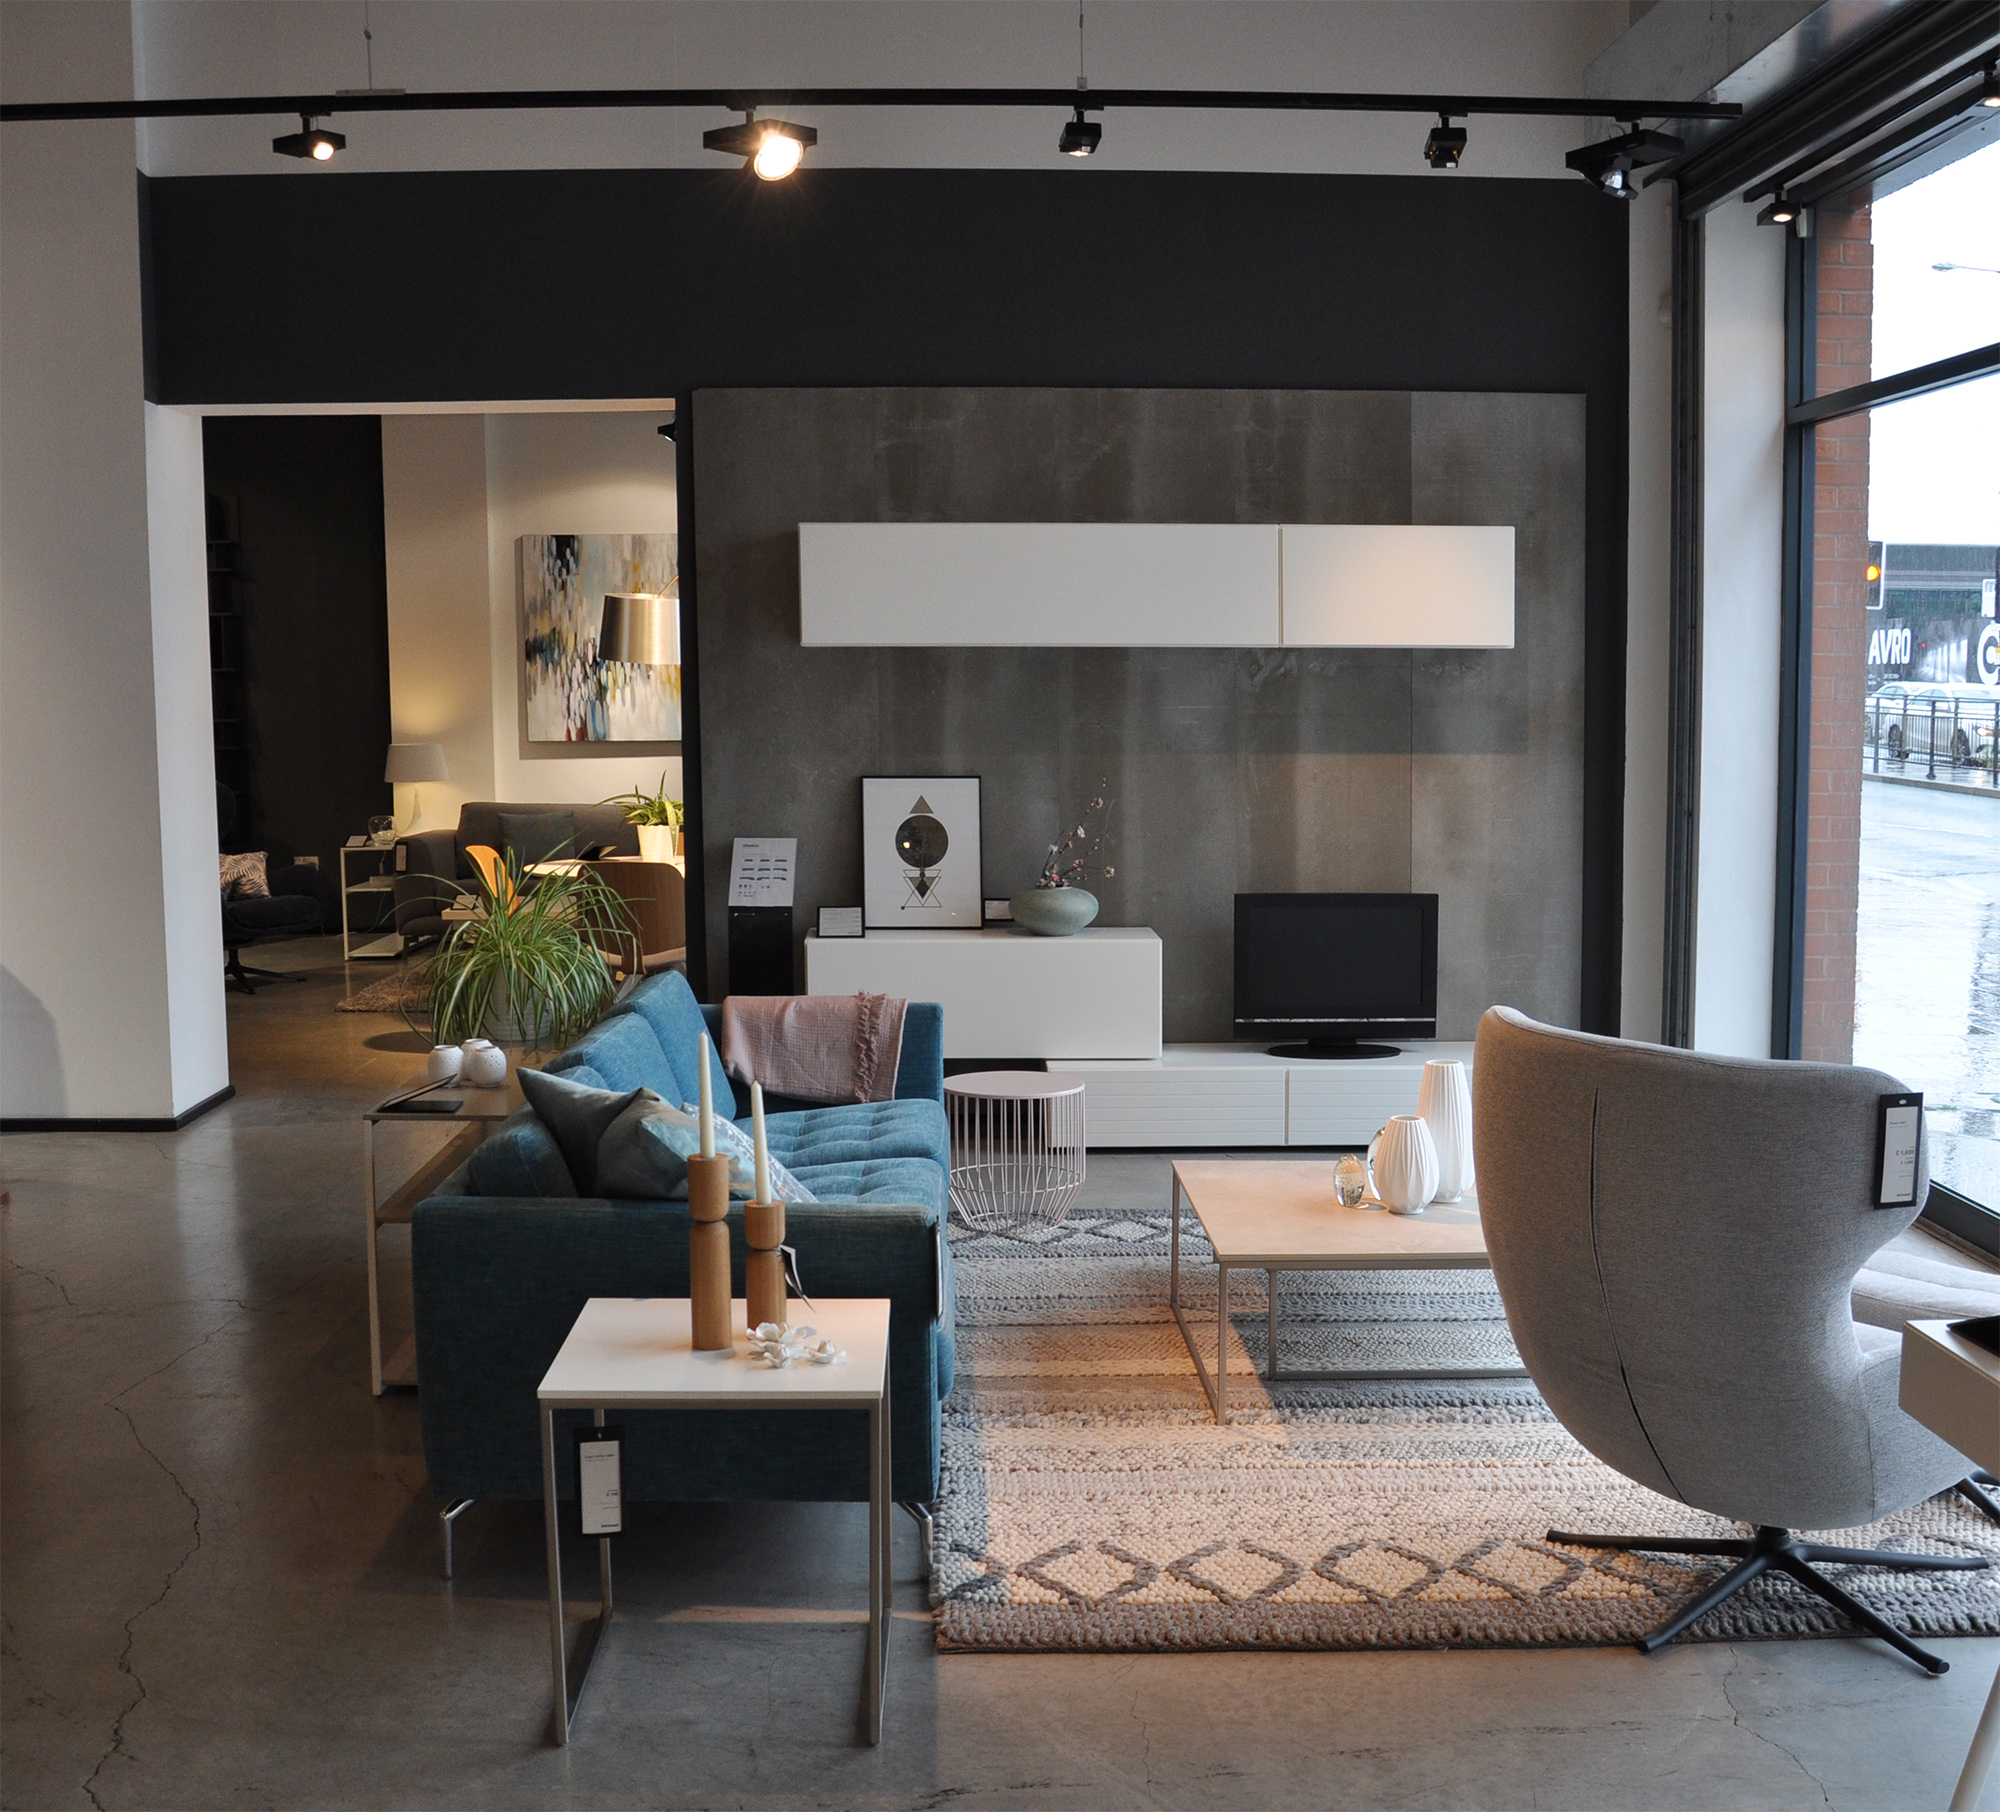 Interior Design And Finding Your Style With Boconcept Manchester